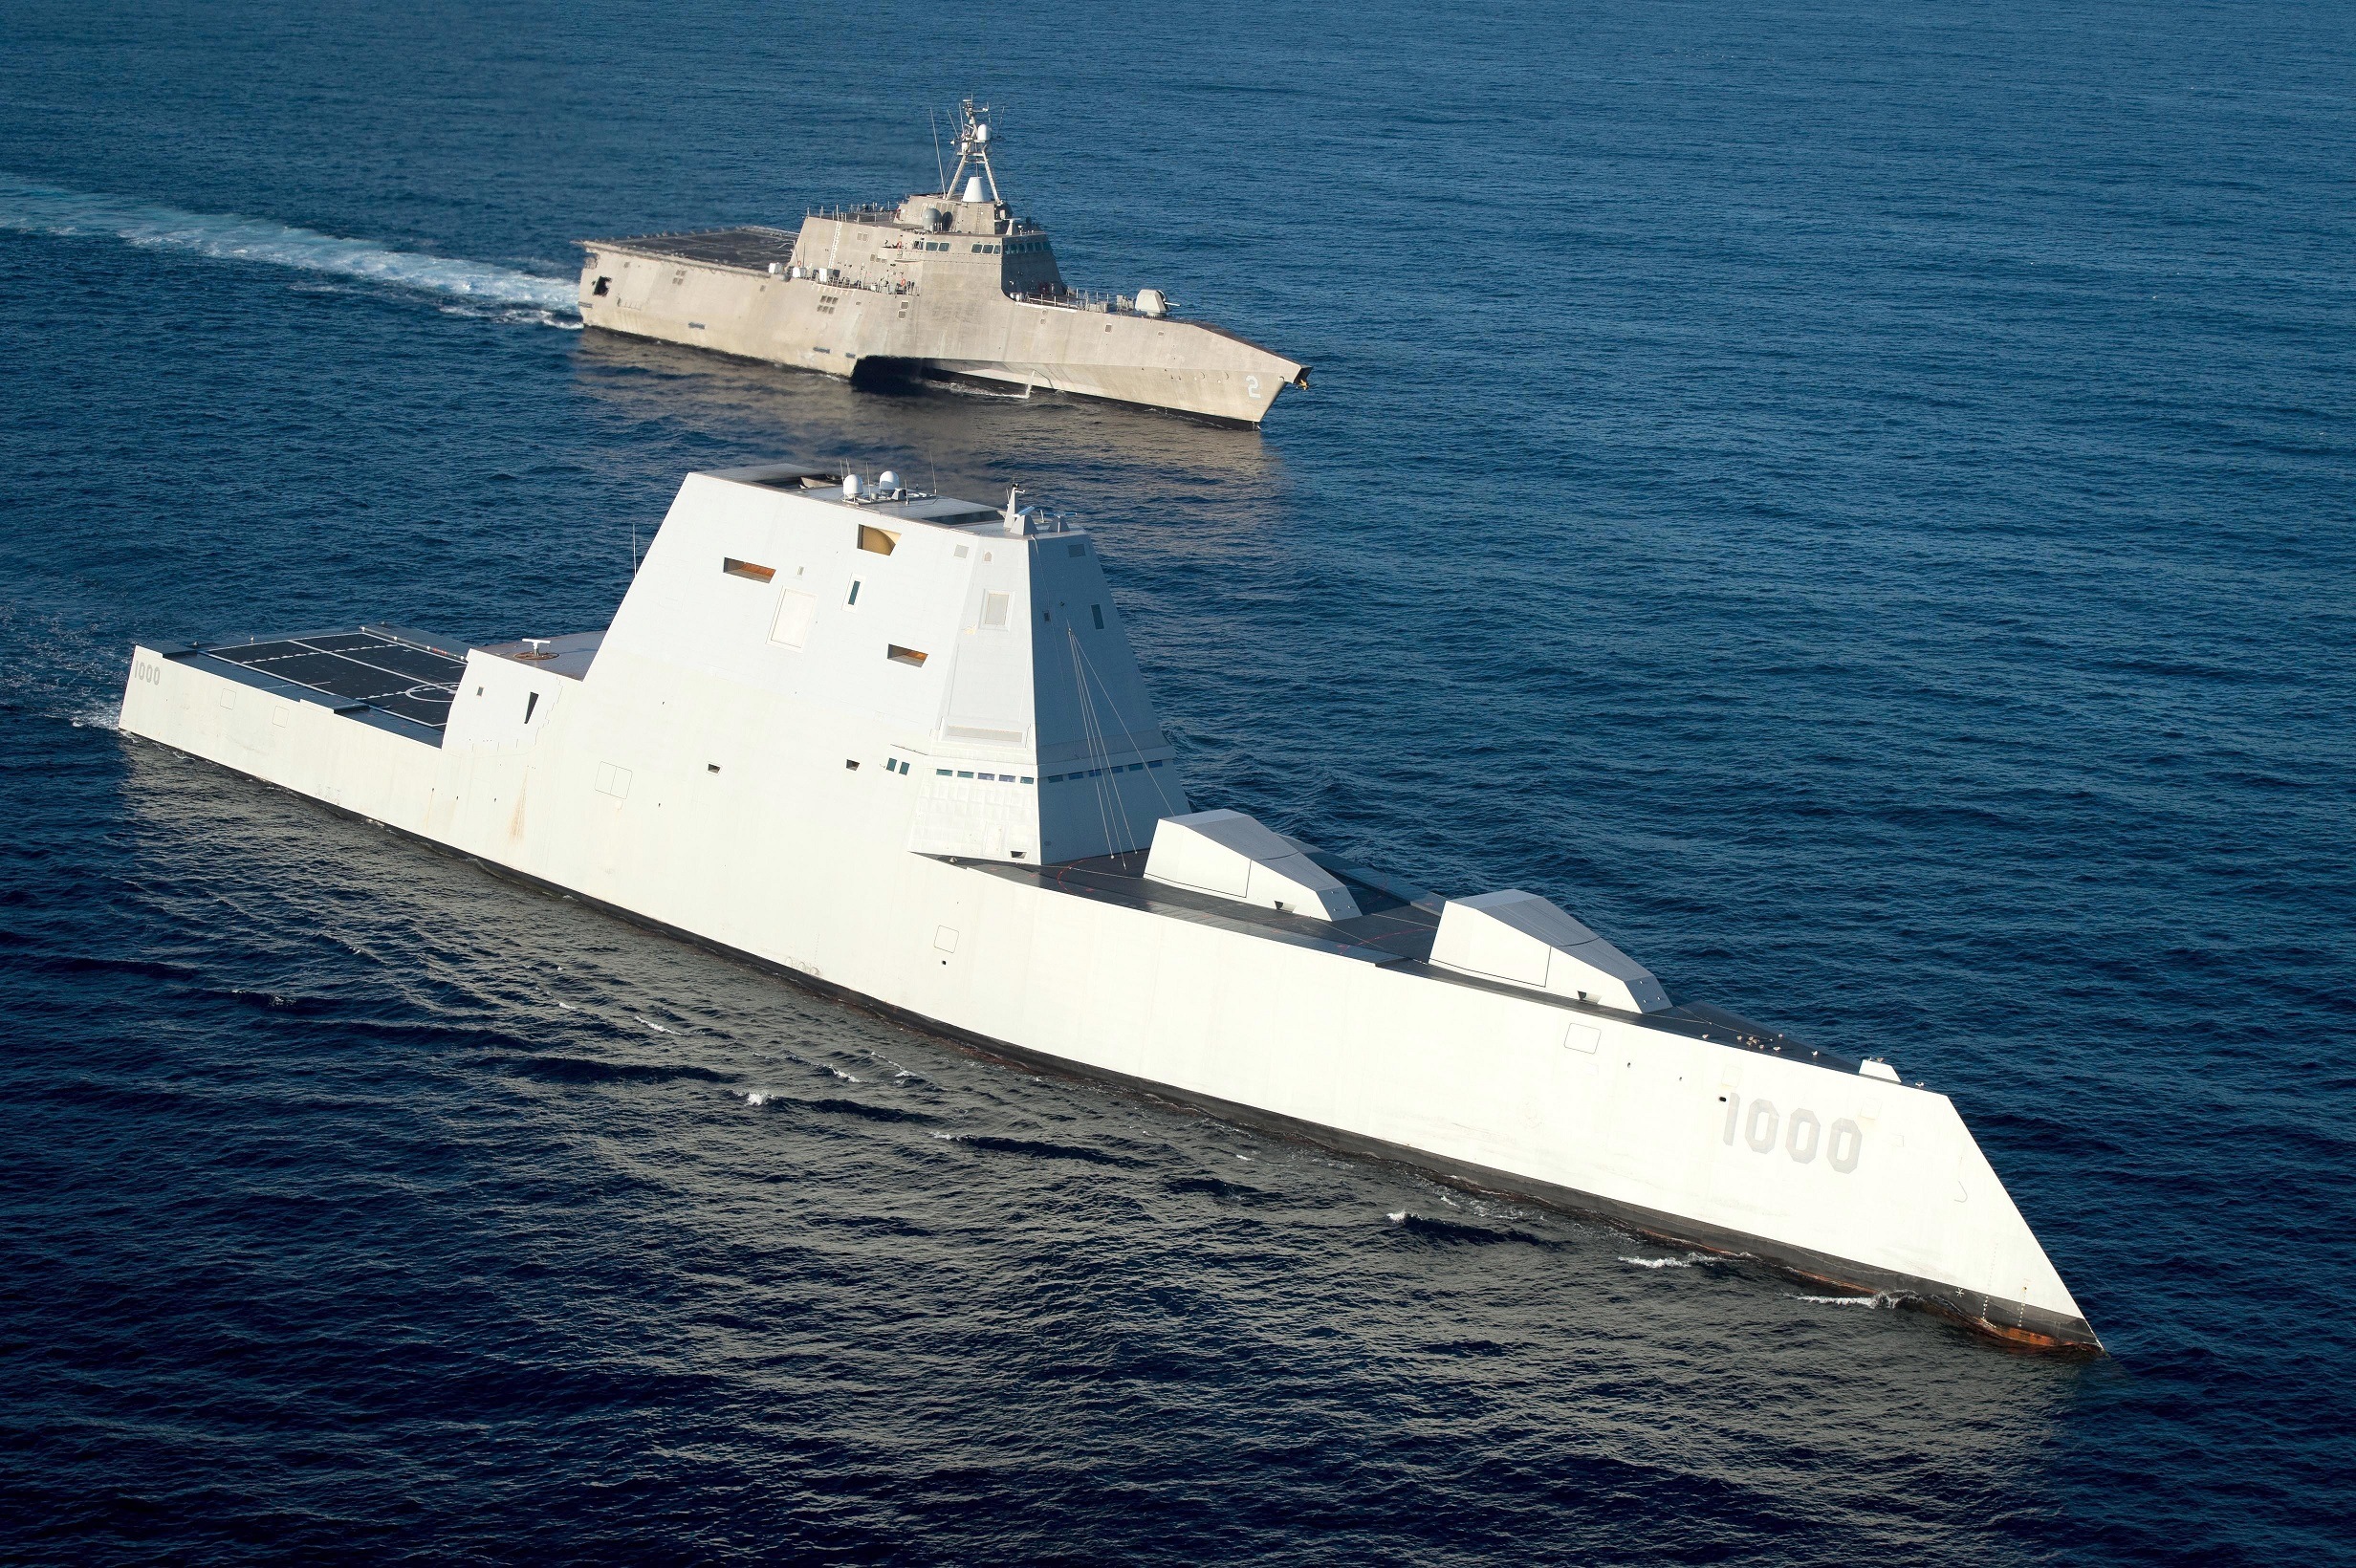 USS Zumwalt is on the final leg of its three-month journey to its new homeport in San Diego.